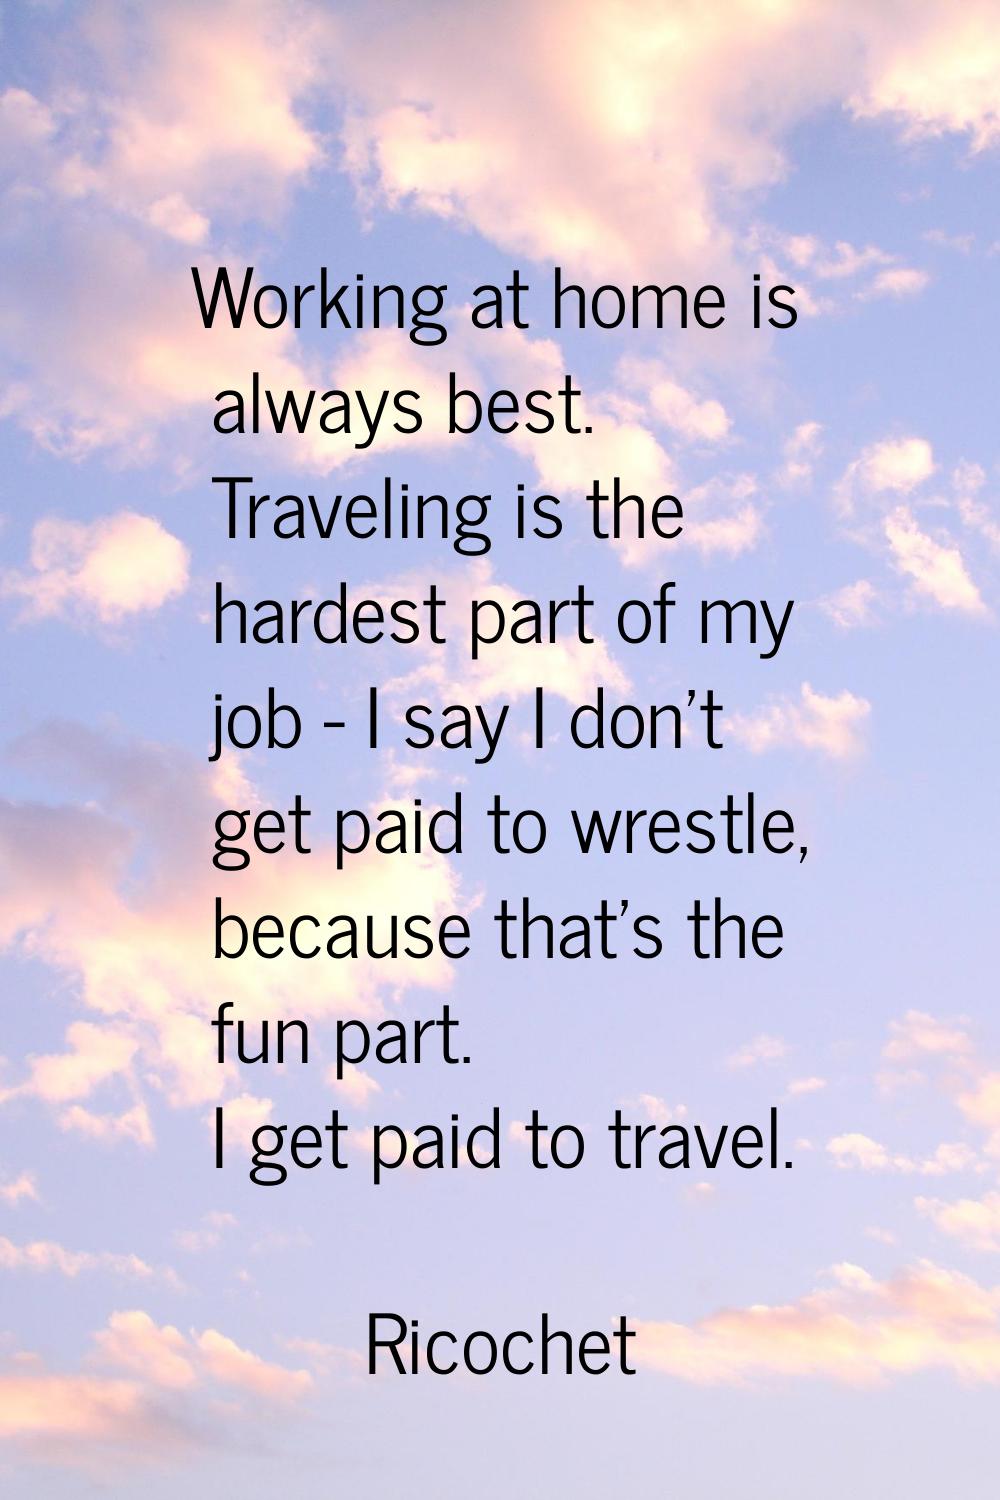 Working at home is always best. Traveling is the hardest part of my job - I say I don't get paid to